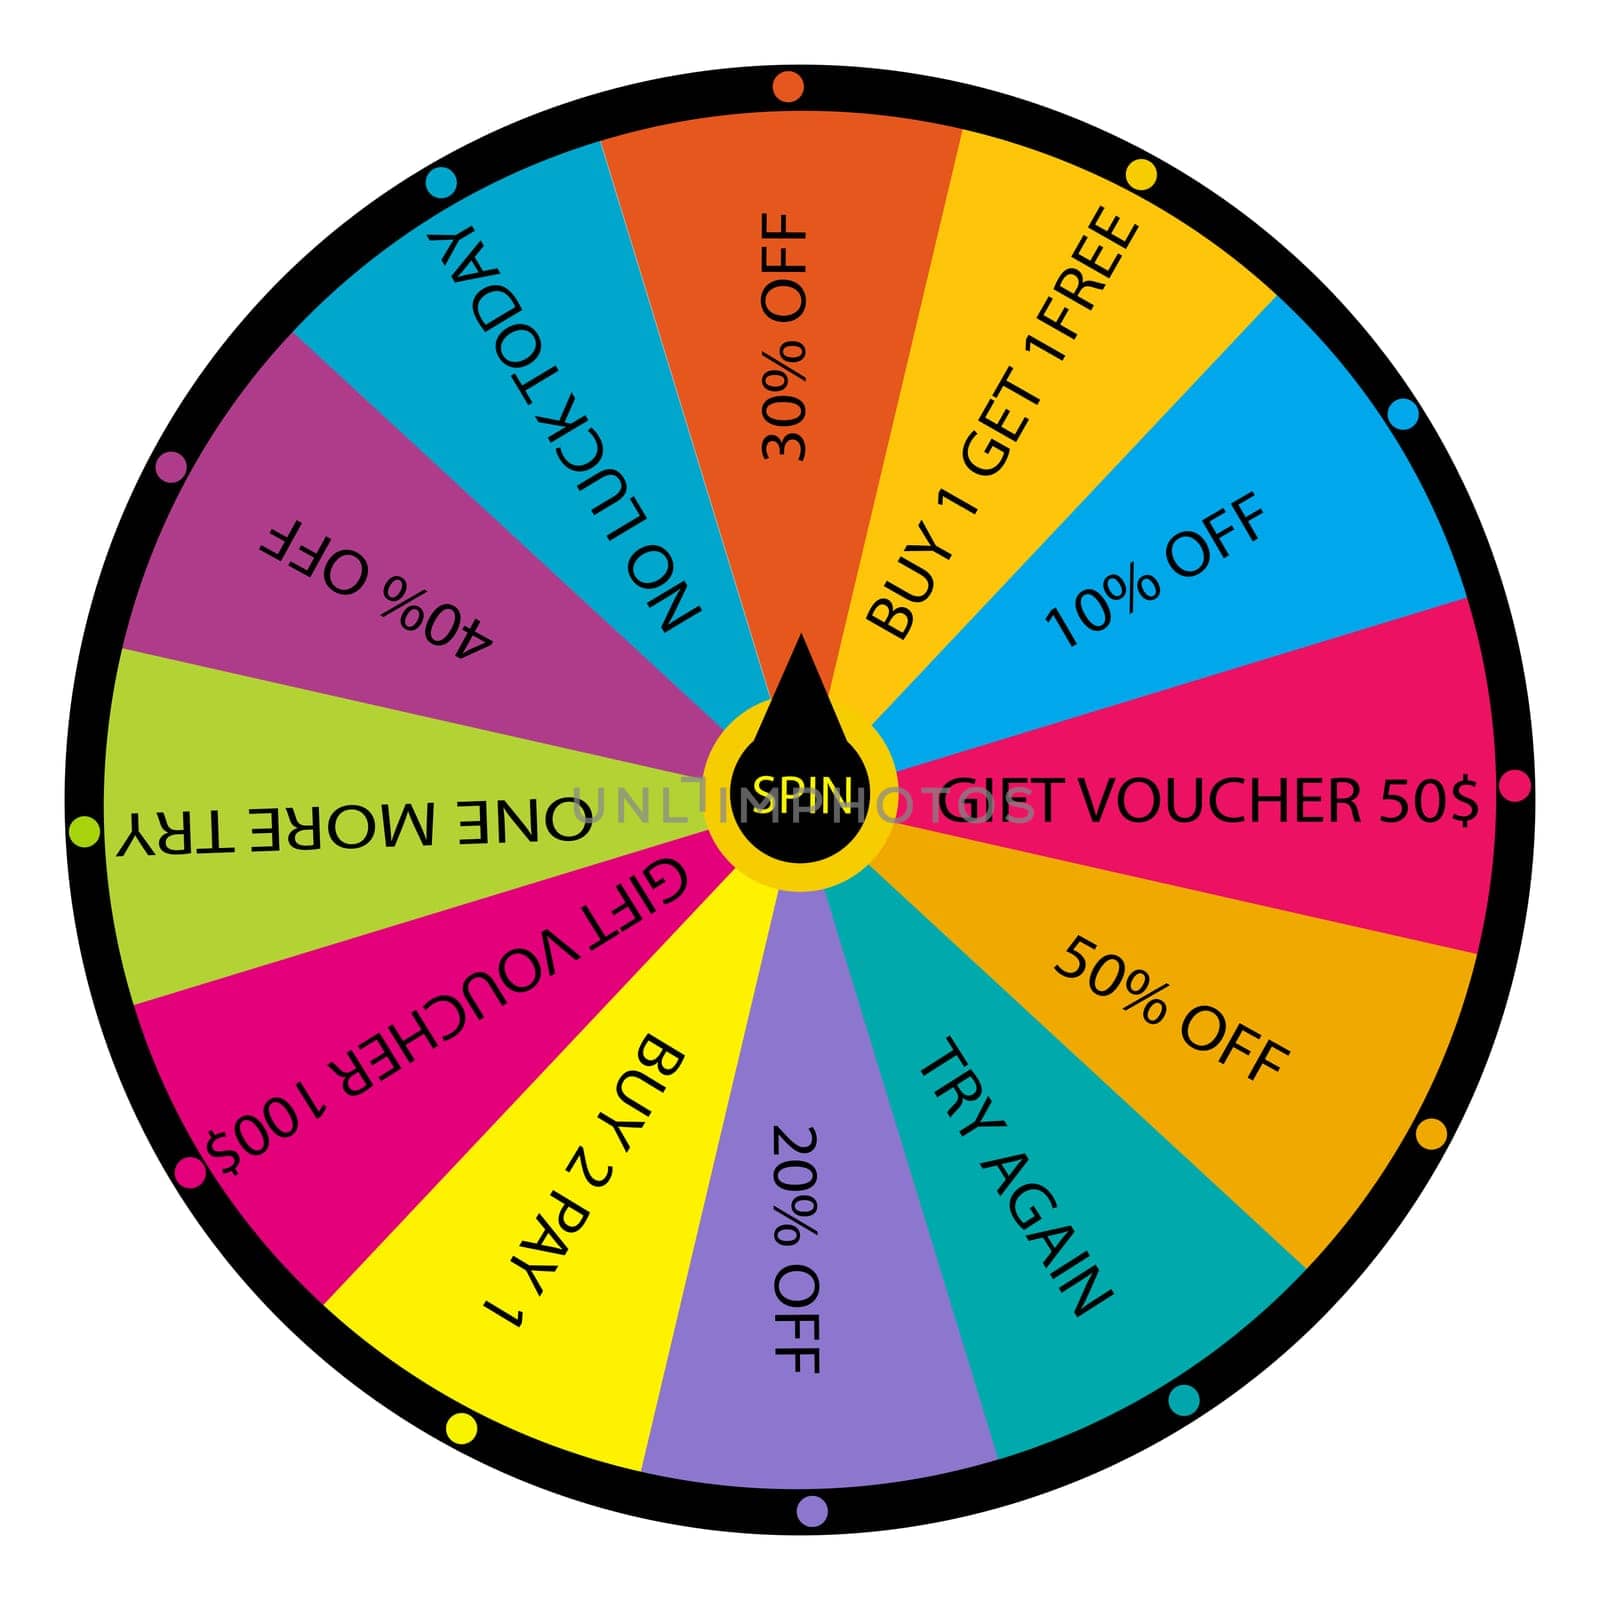 The wheel of fortune with voucher prizes and discounts or commercial offers by hibrida13